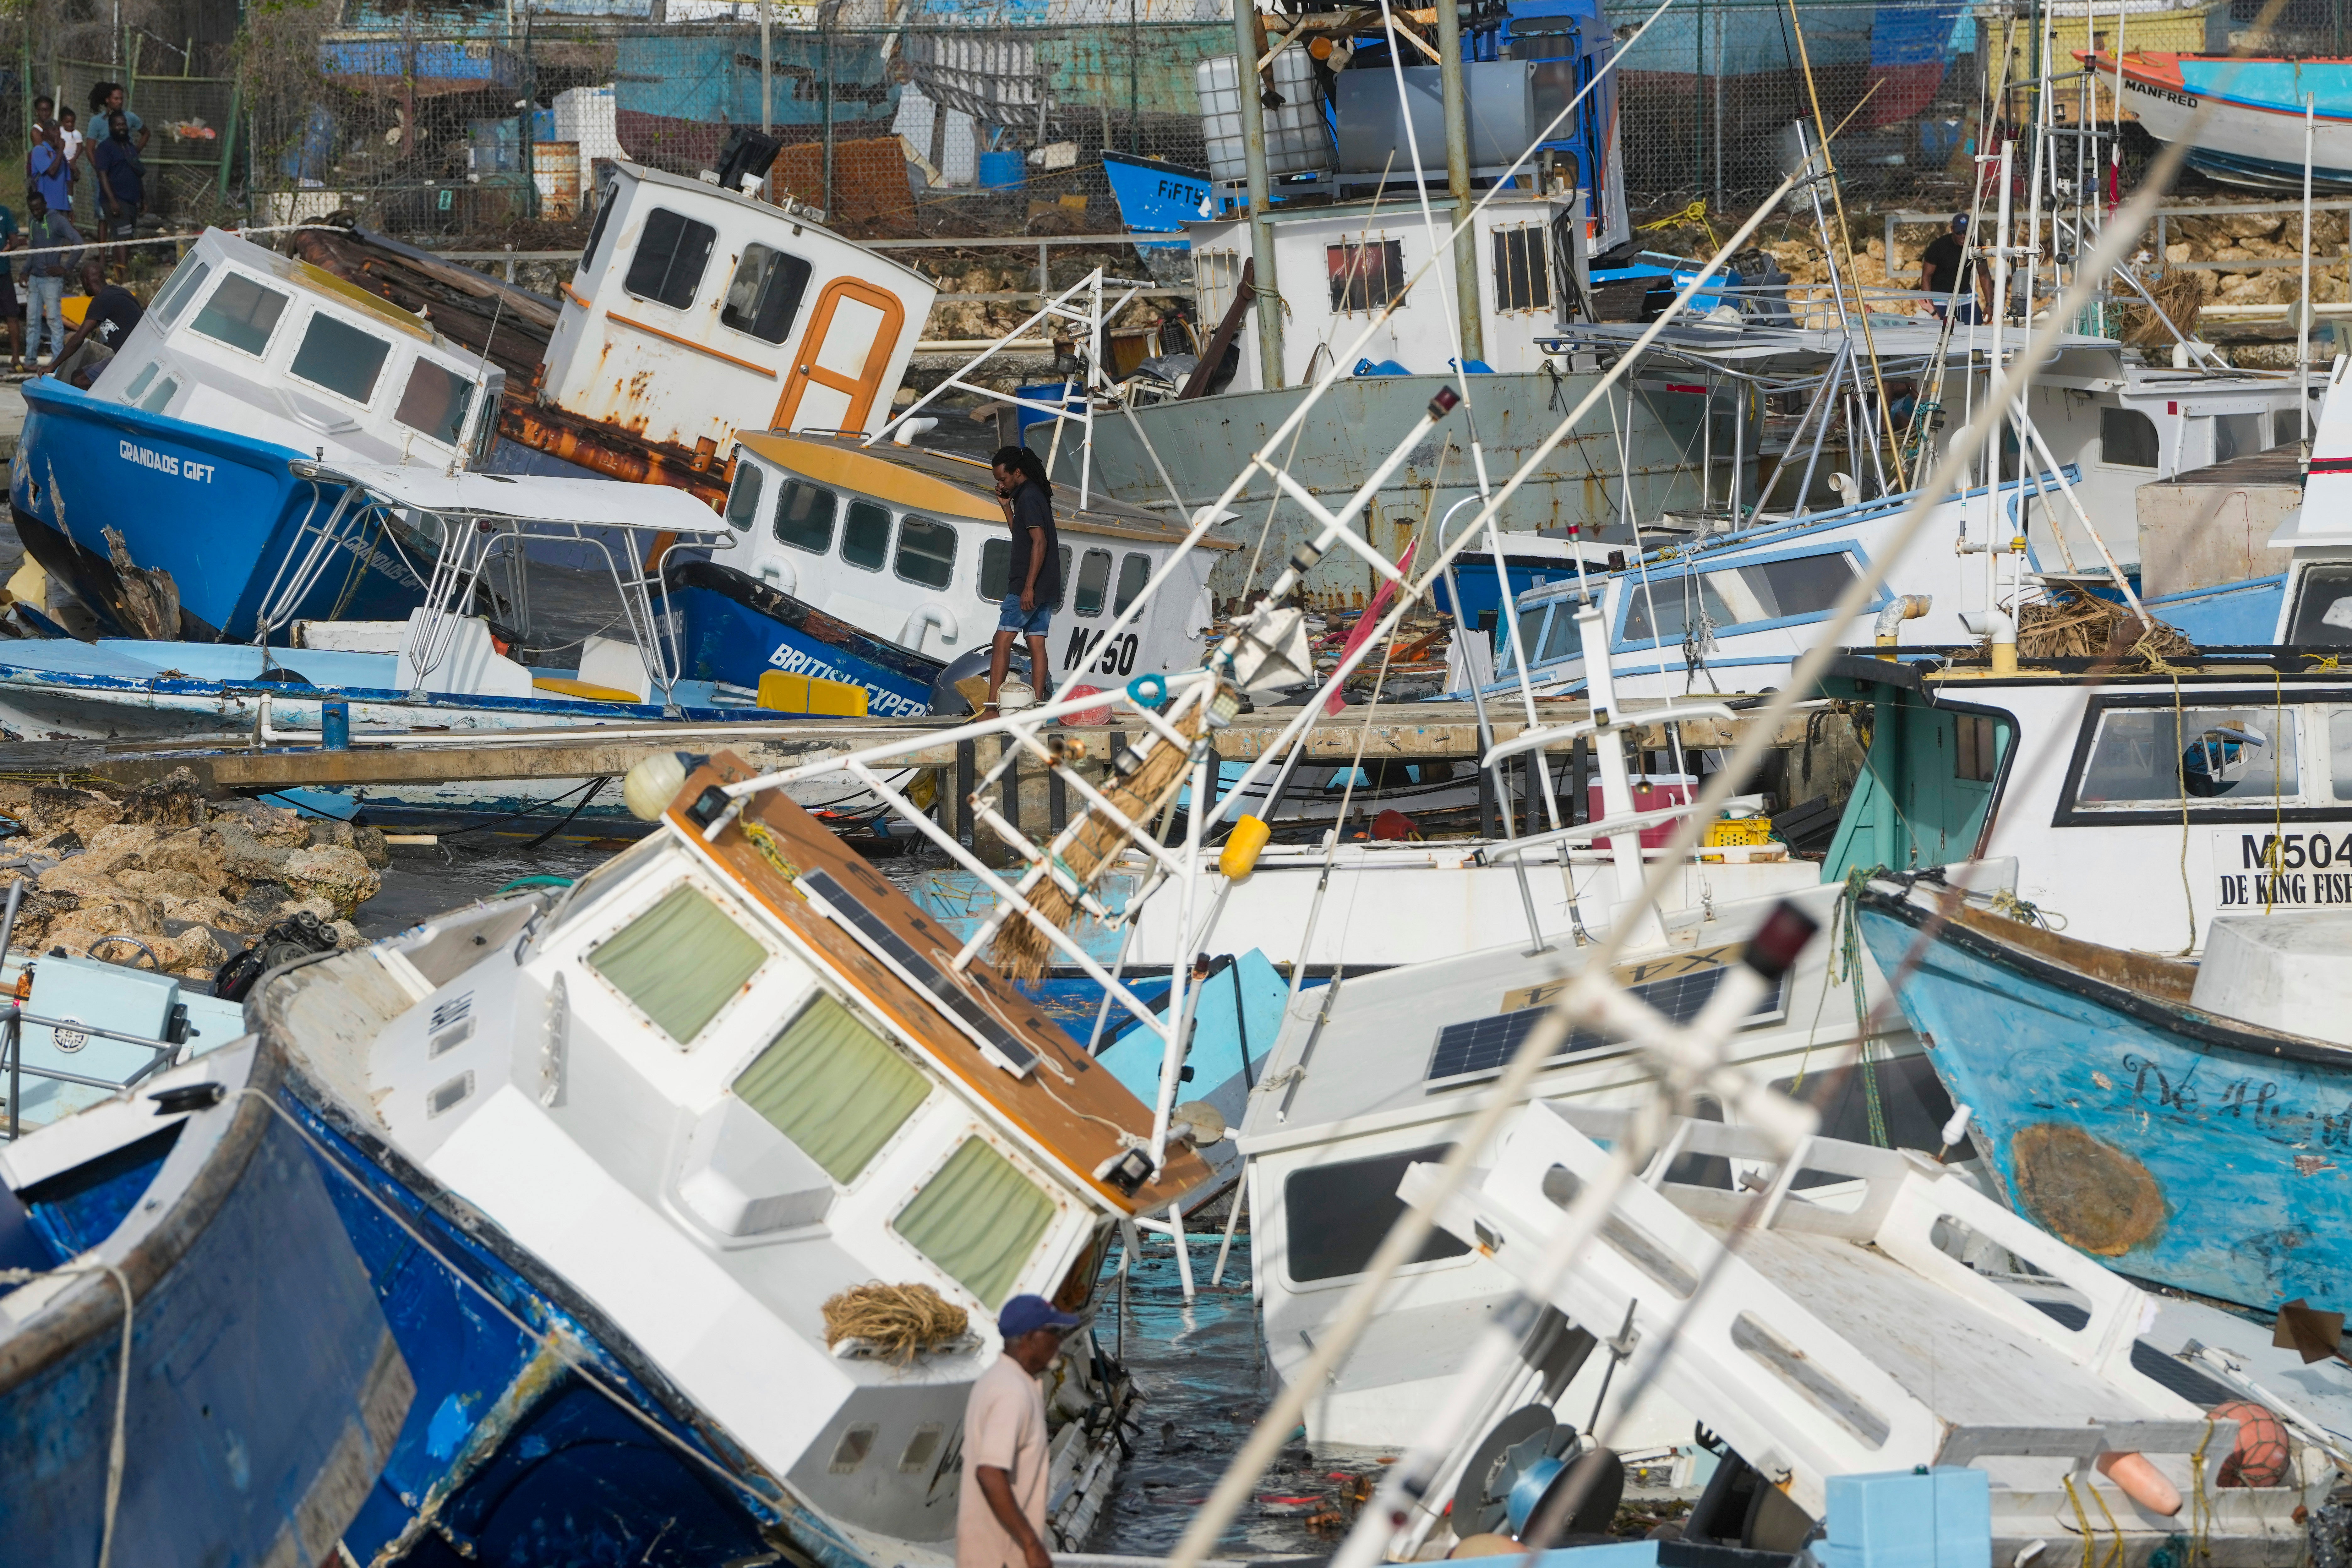 A fisherman looks at fishing vessels damaged by Hurricane Beryl at the Bridgetown Fisheries in Barbados